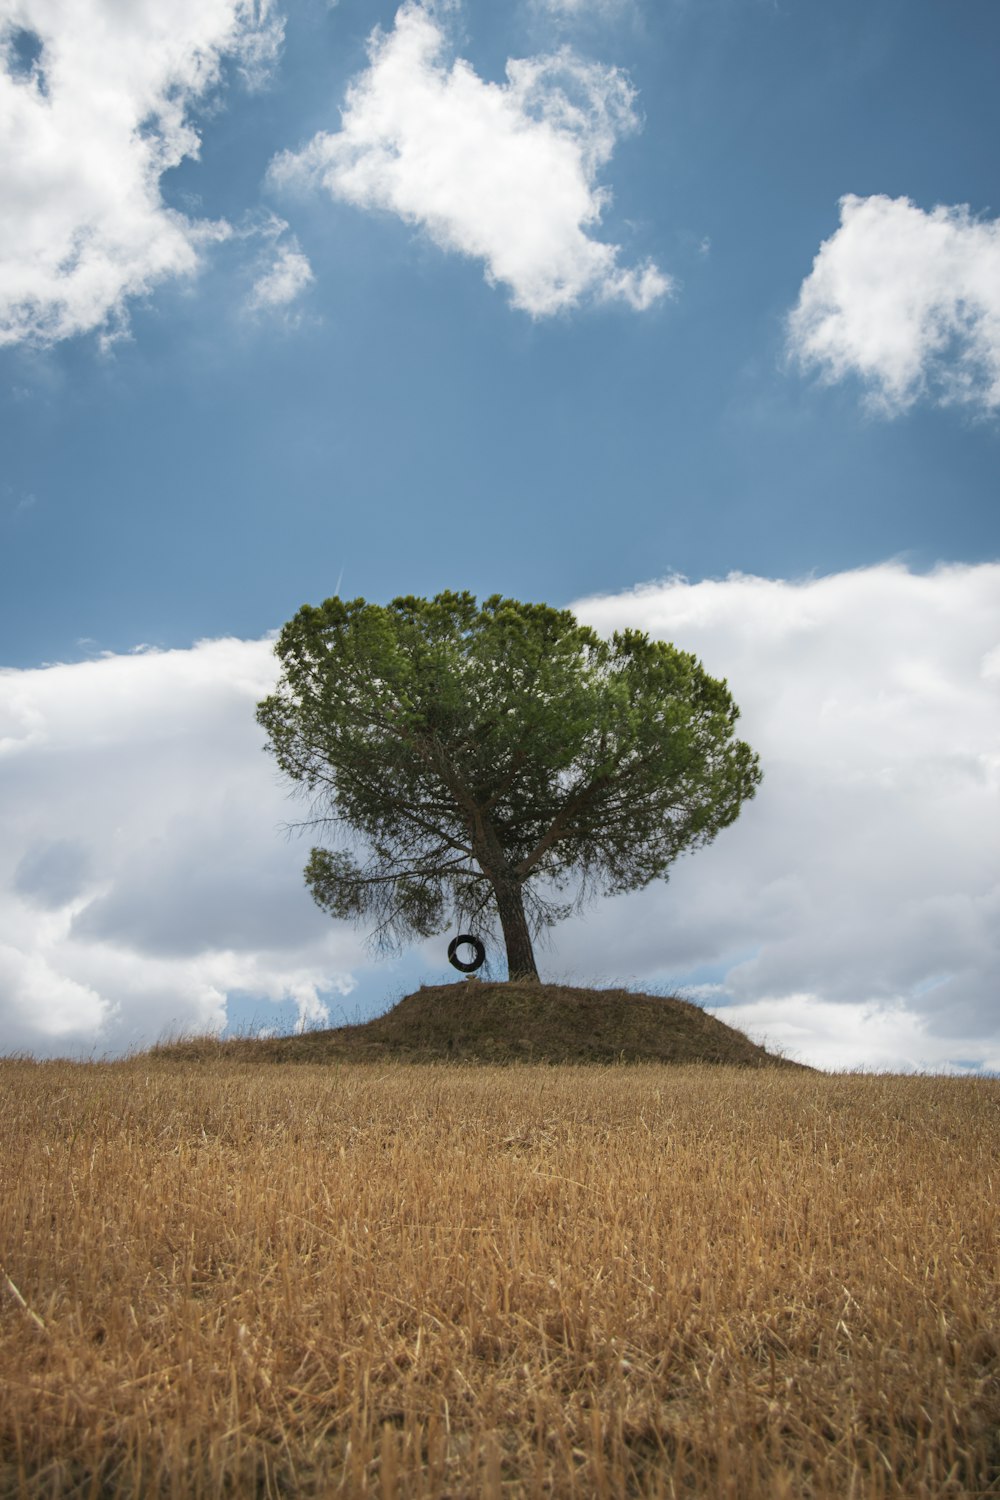 green tree on brown grass field under white clouds and blue sky during daytime